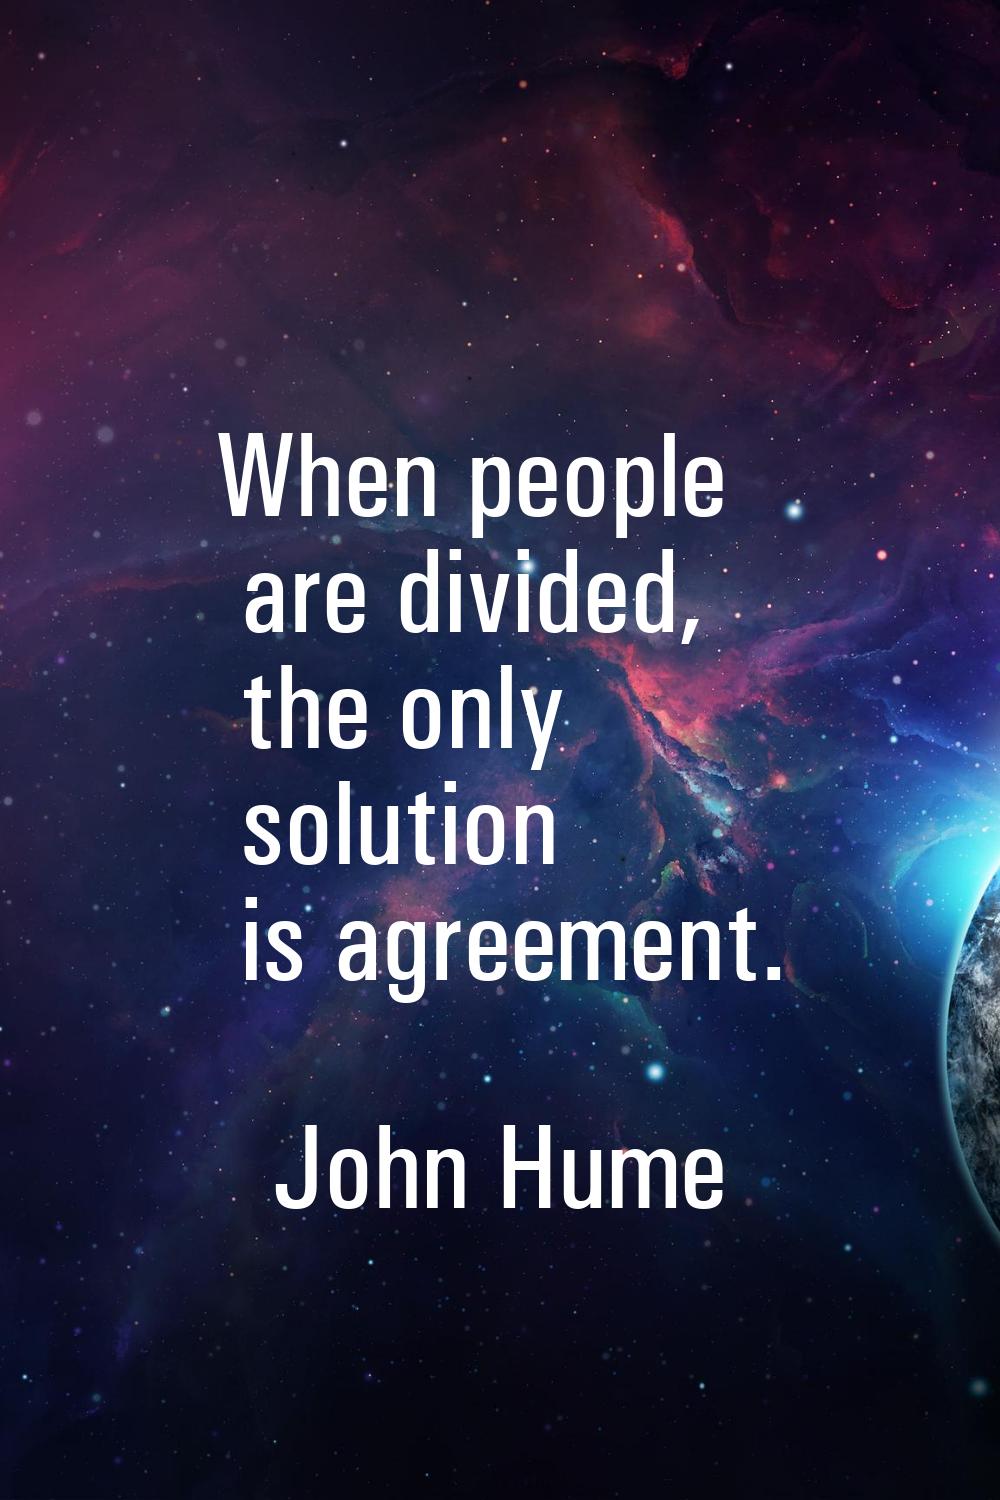 When people are divided, the only solution is agreement.